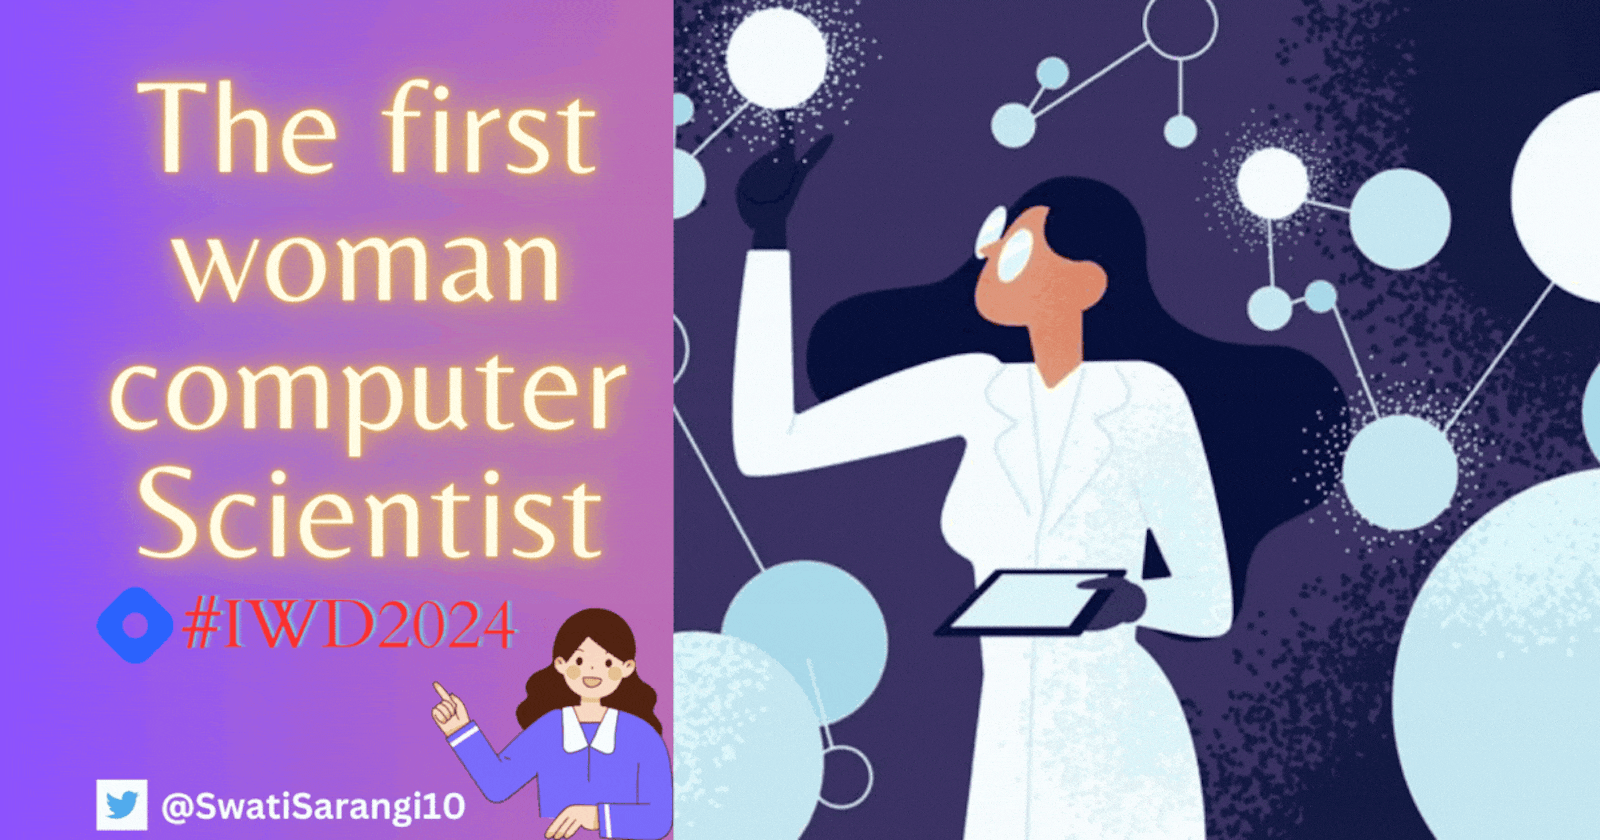 The first woman computer Scientists